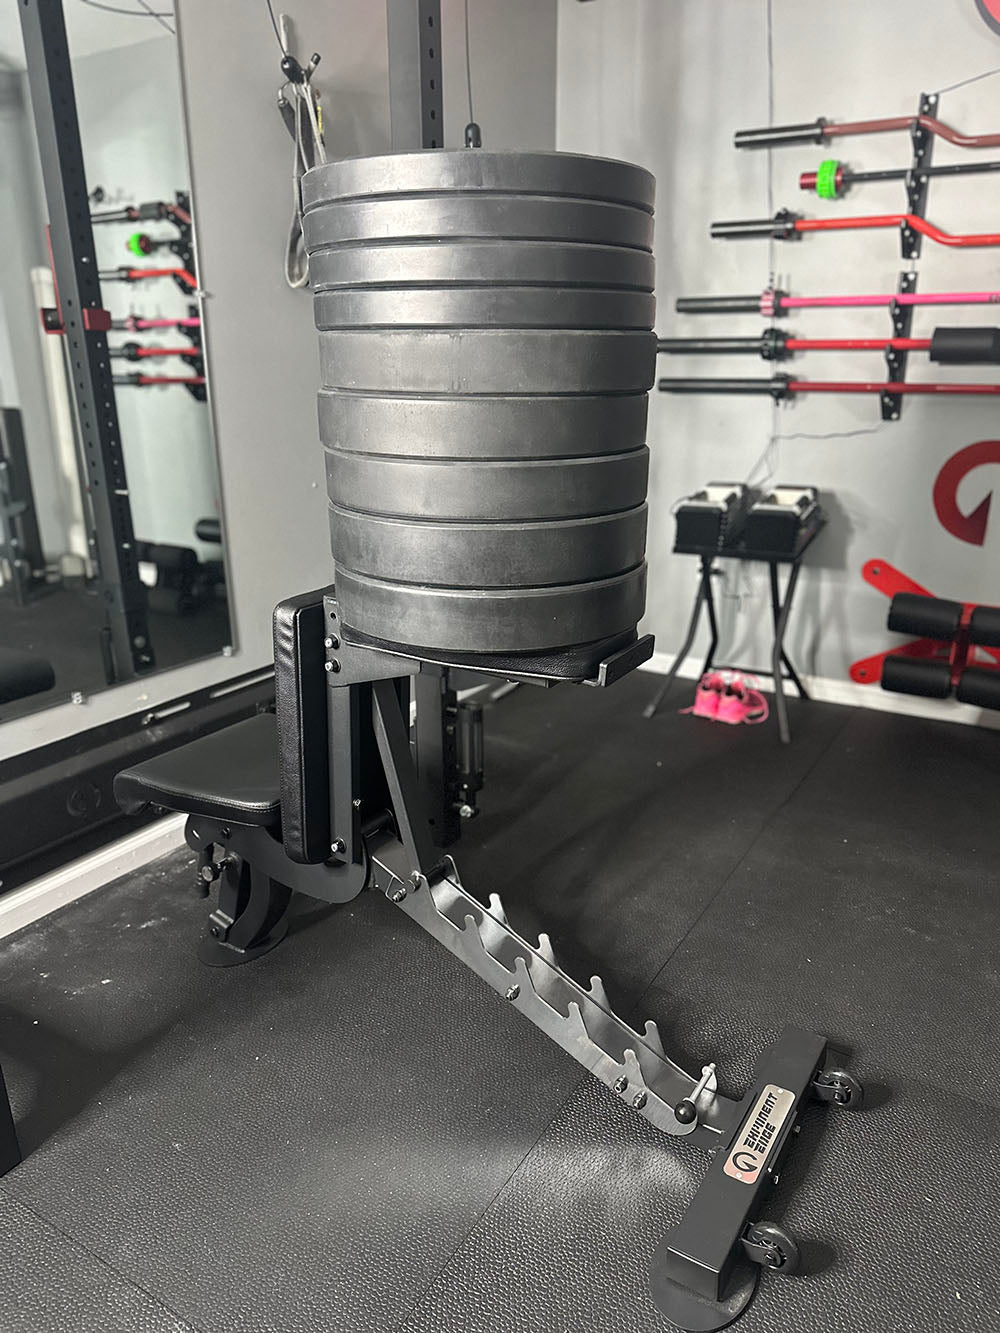 The Edge Infinity Bench is a bench that combines three separate benches all into one bench. You get the benefits of a flat bench, incline bench, and half bench all in one device. This image presents a close-up of the bench supporting several weight plates. 